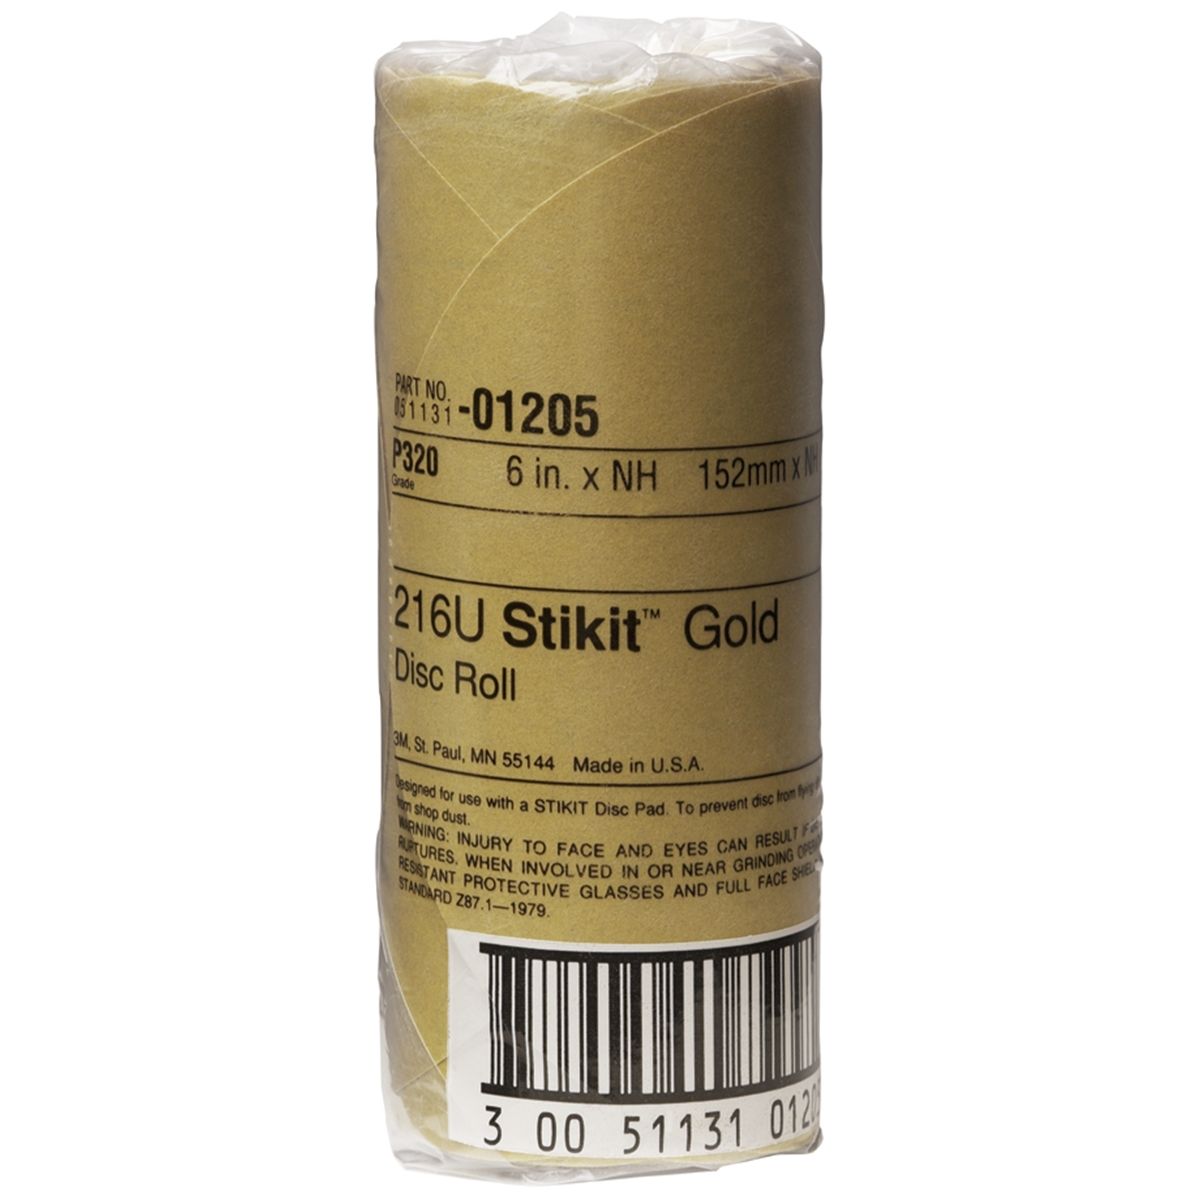 Stikit Gold Disc Roll - 6 In - 320 Grade